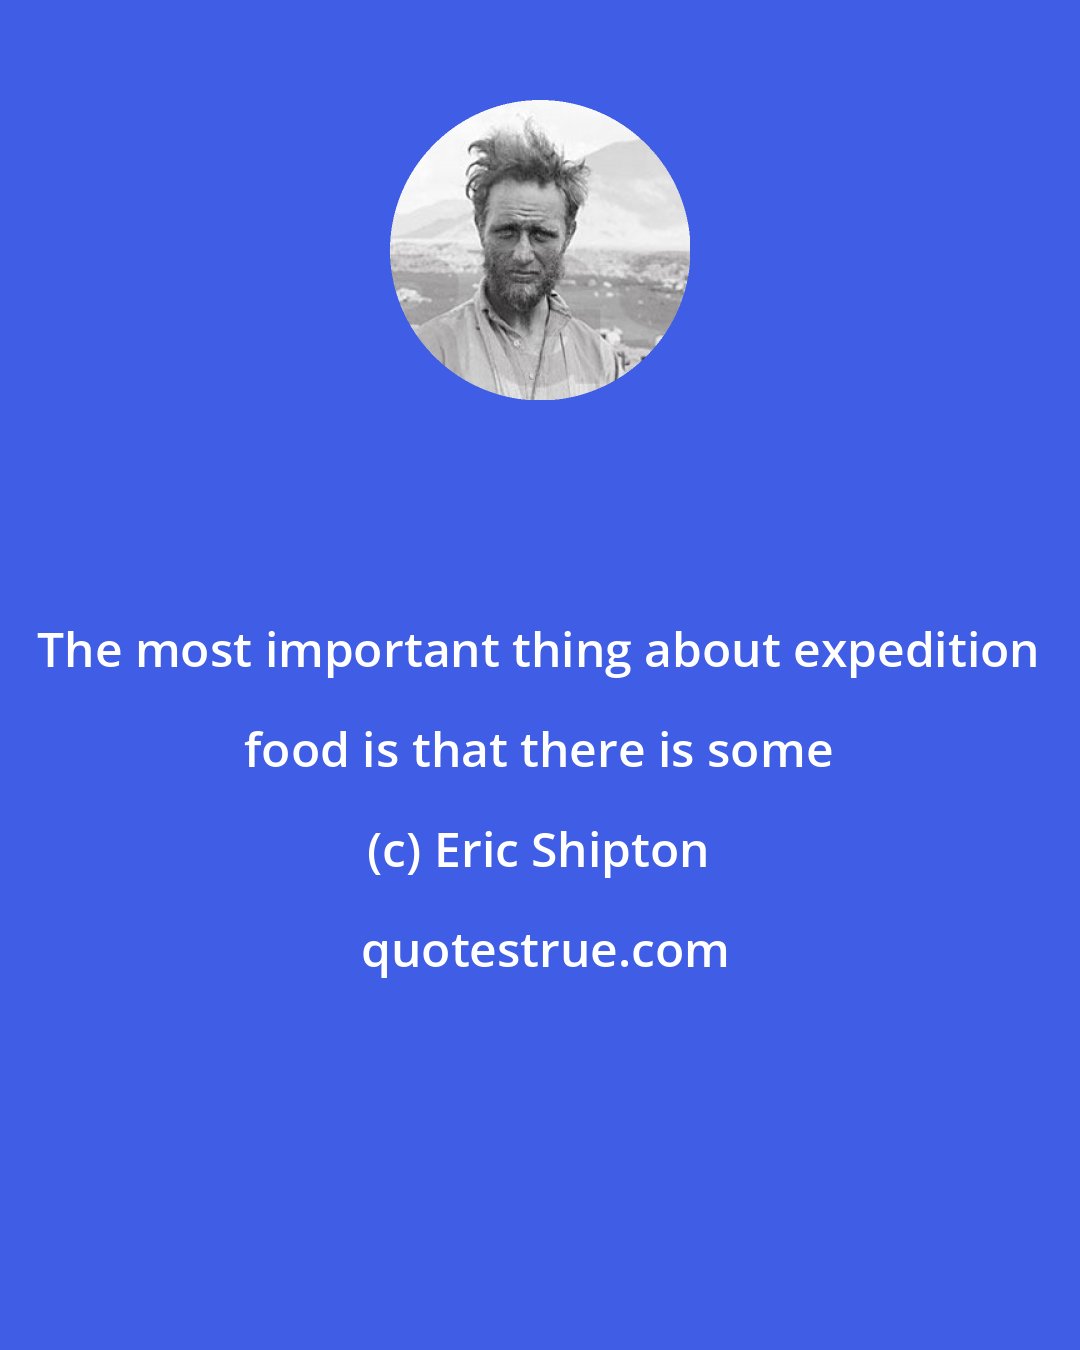 Eric Shipton: The most important thing about expedition food is that there is some